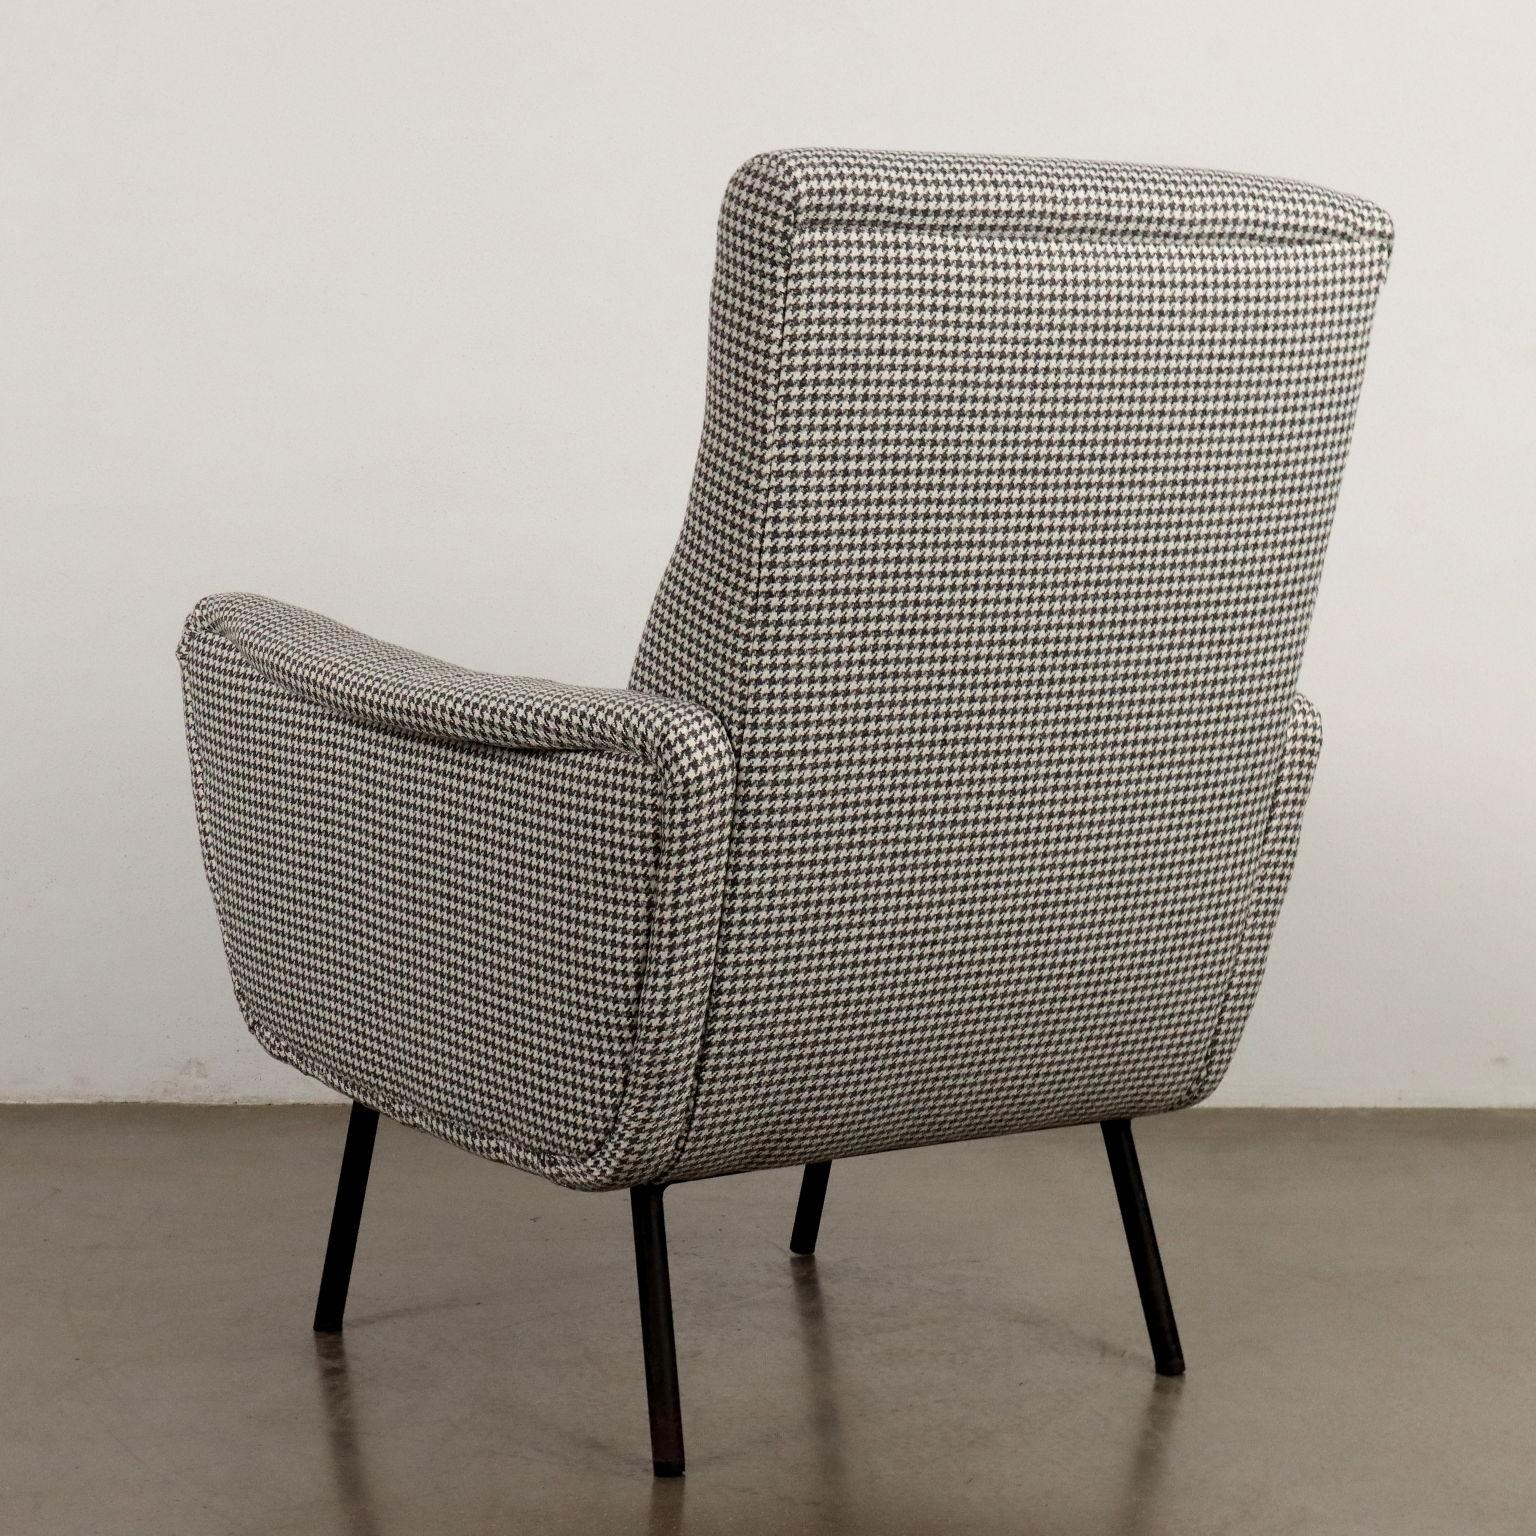 Pair of Houndstooth Armchairs 1950s-1960s For Sale 2